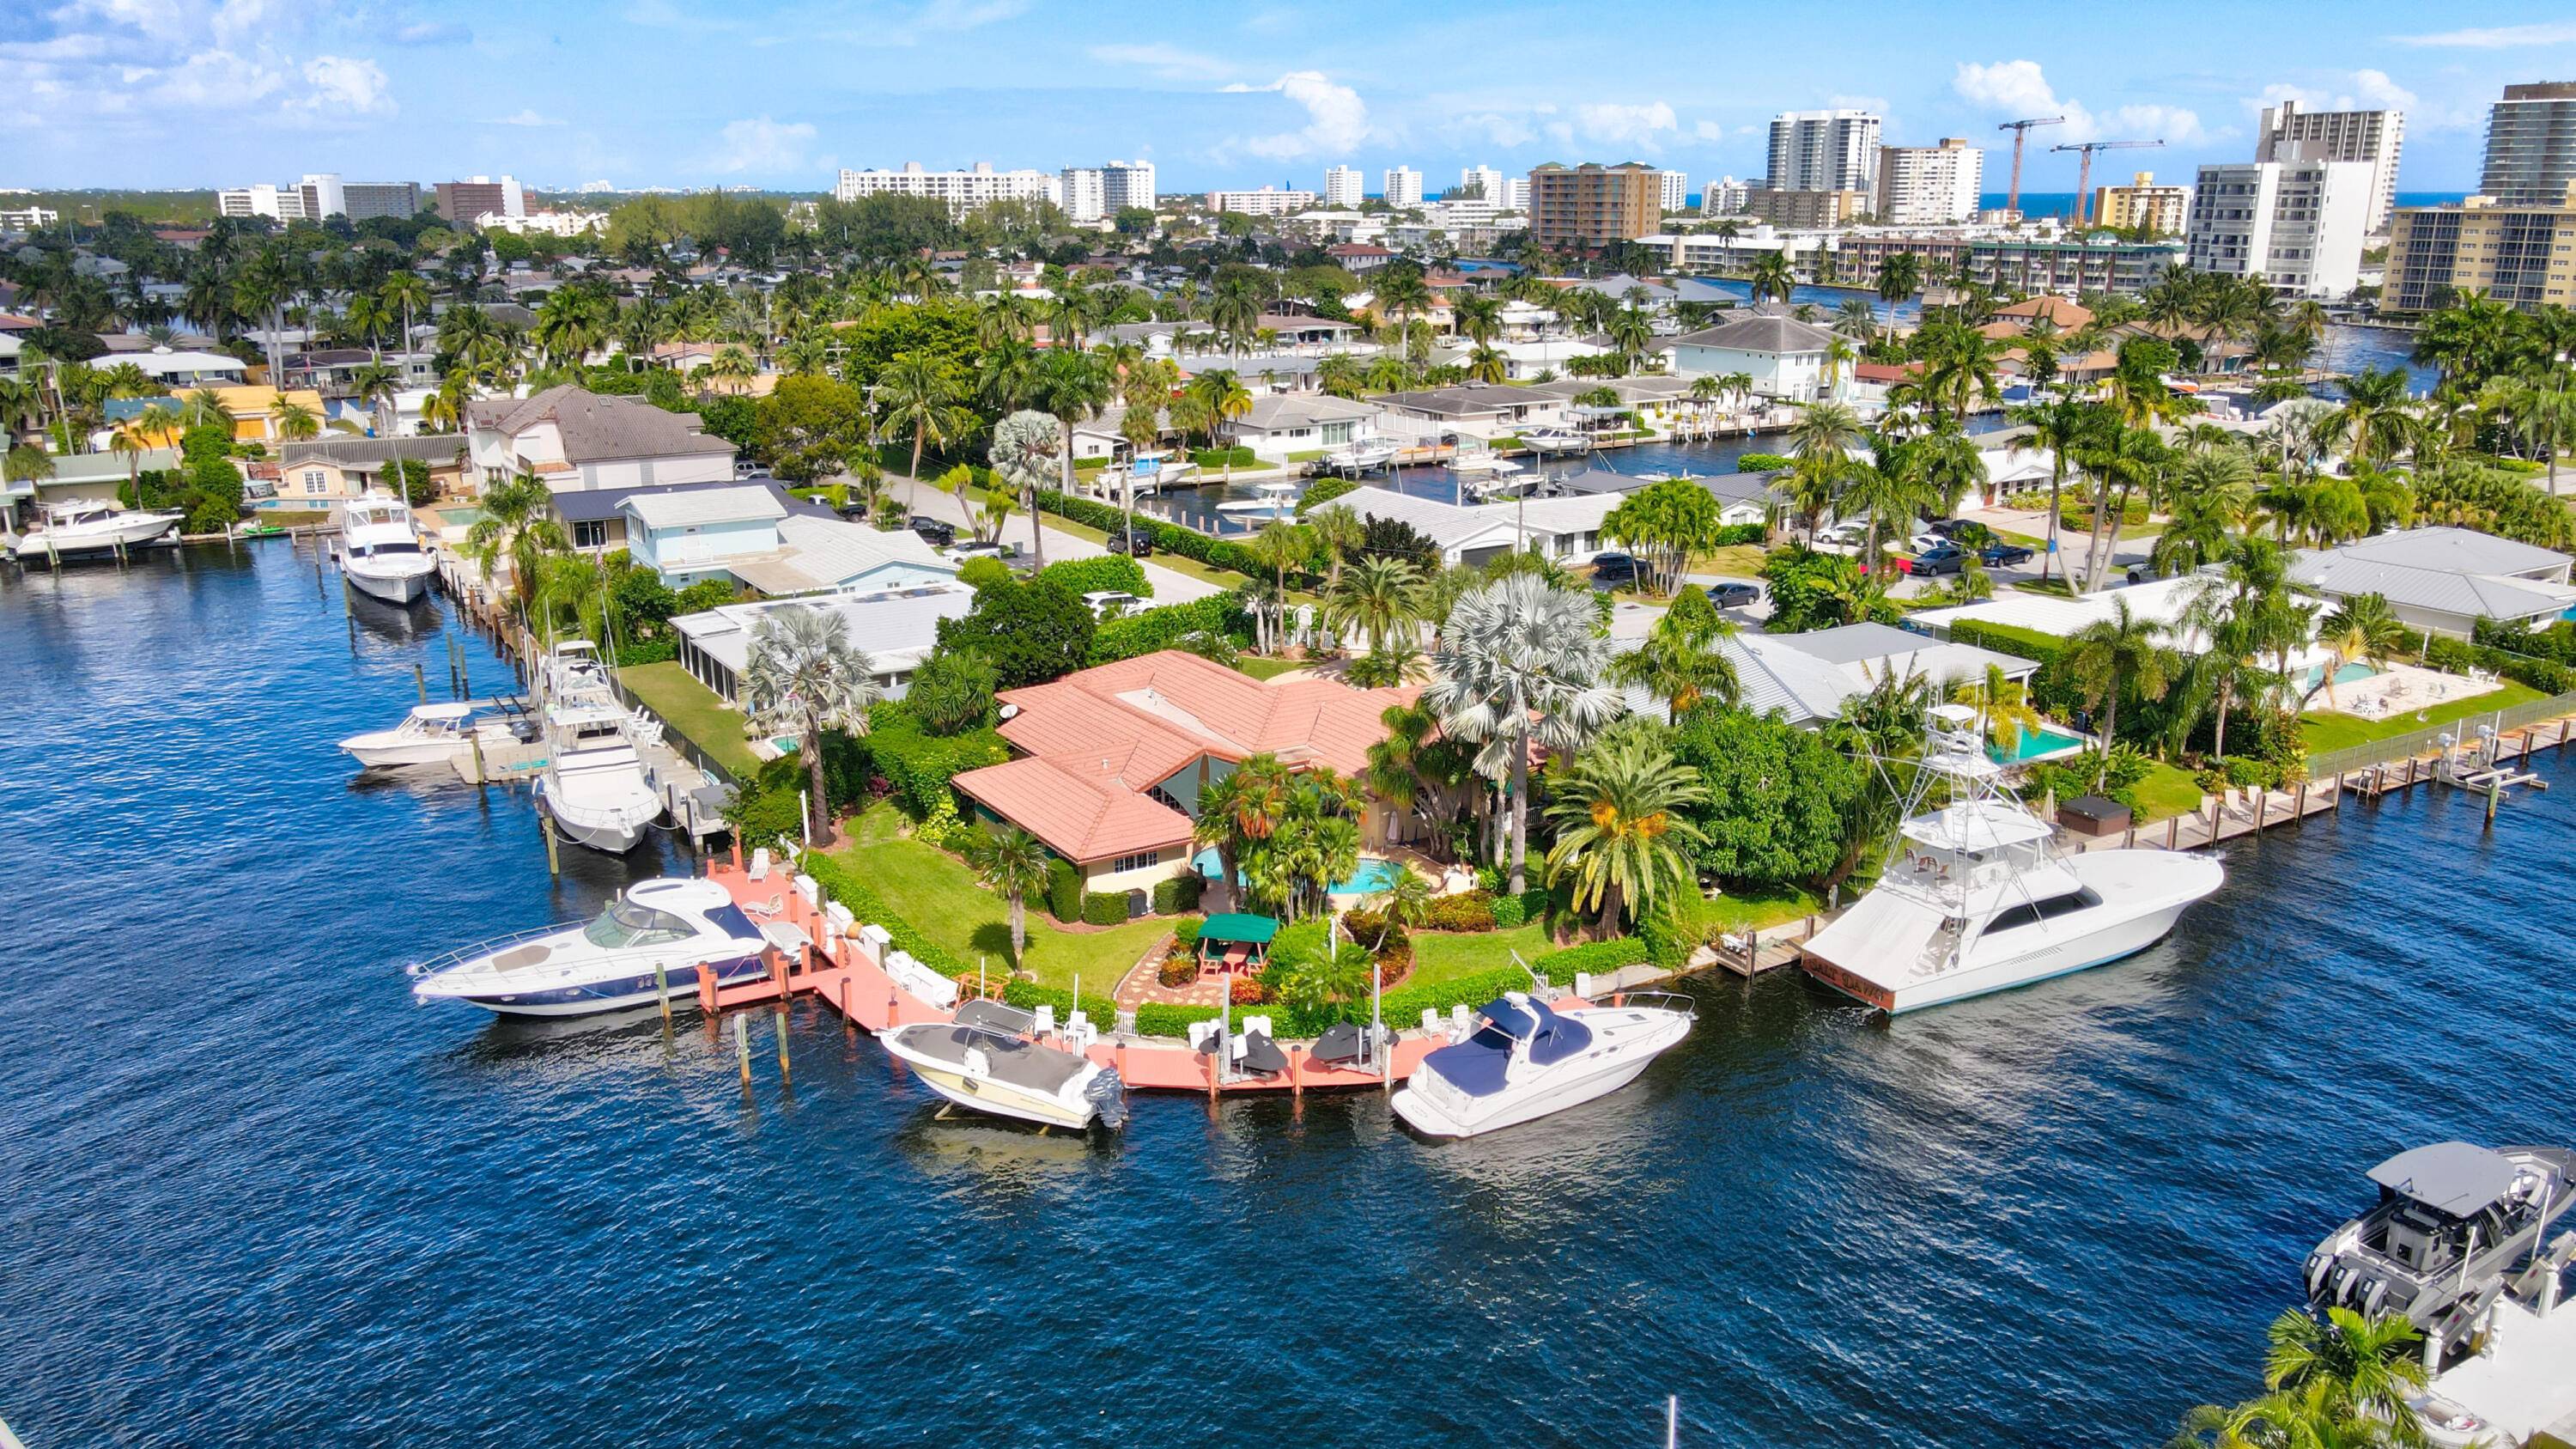 Experience an extraordinary boater's paradise nestled in the heart of Pompano Beach, where the allure of waterfront living reaches its zenith.